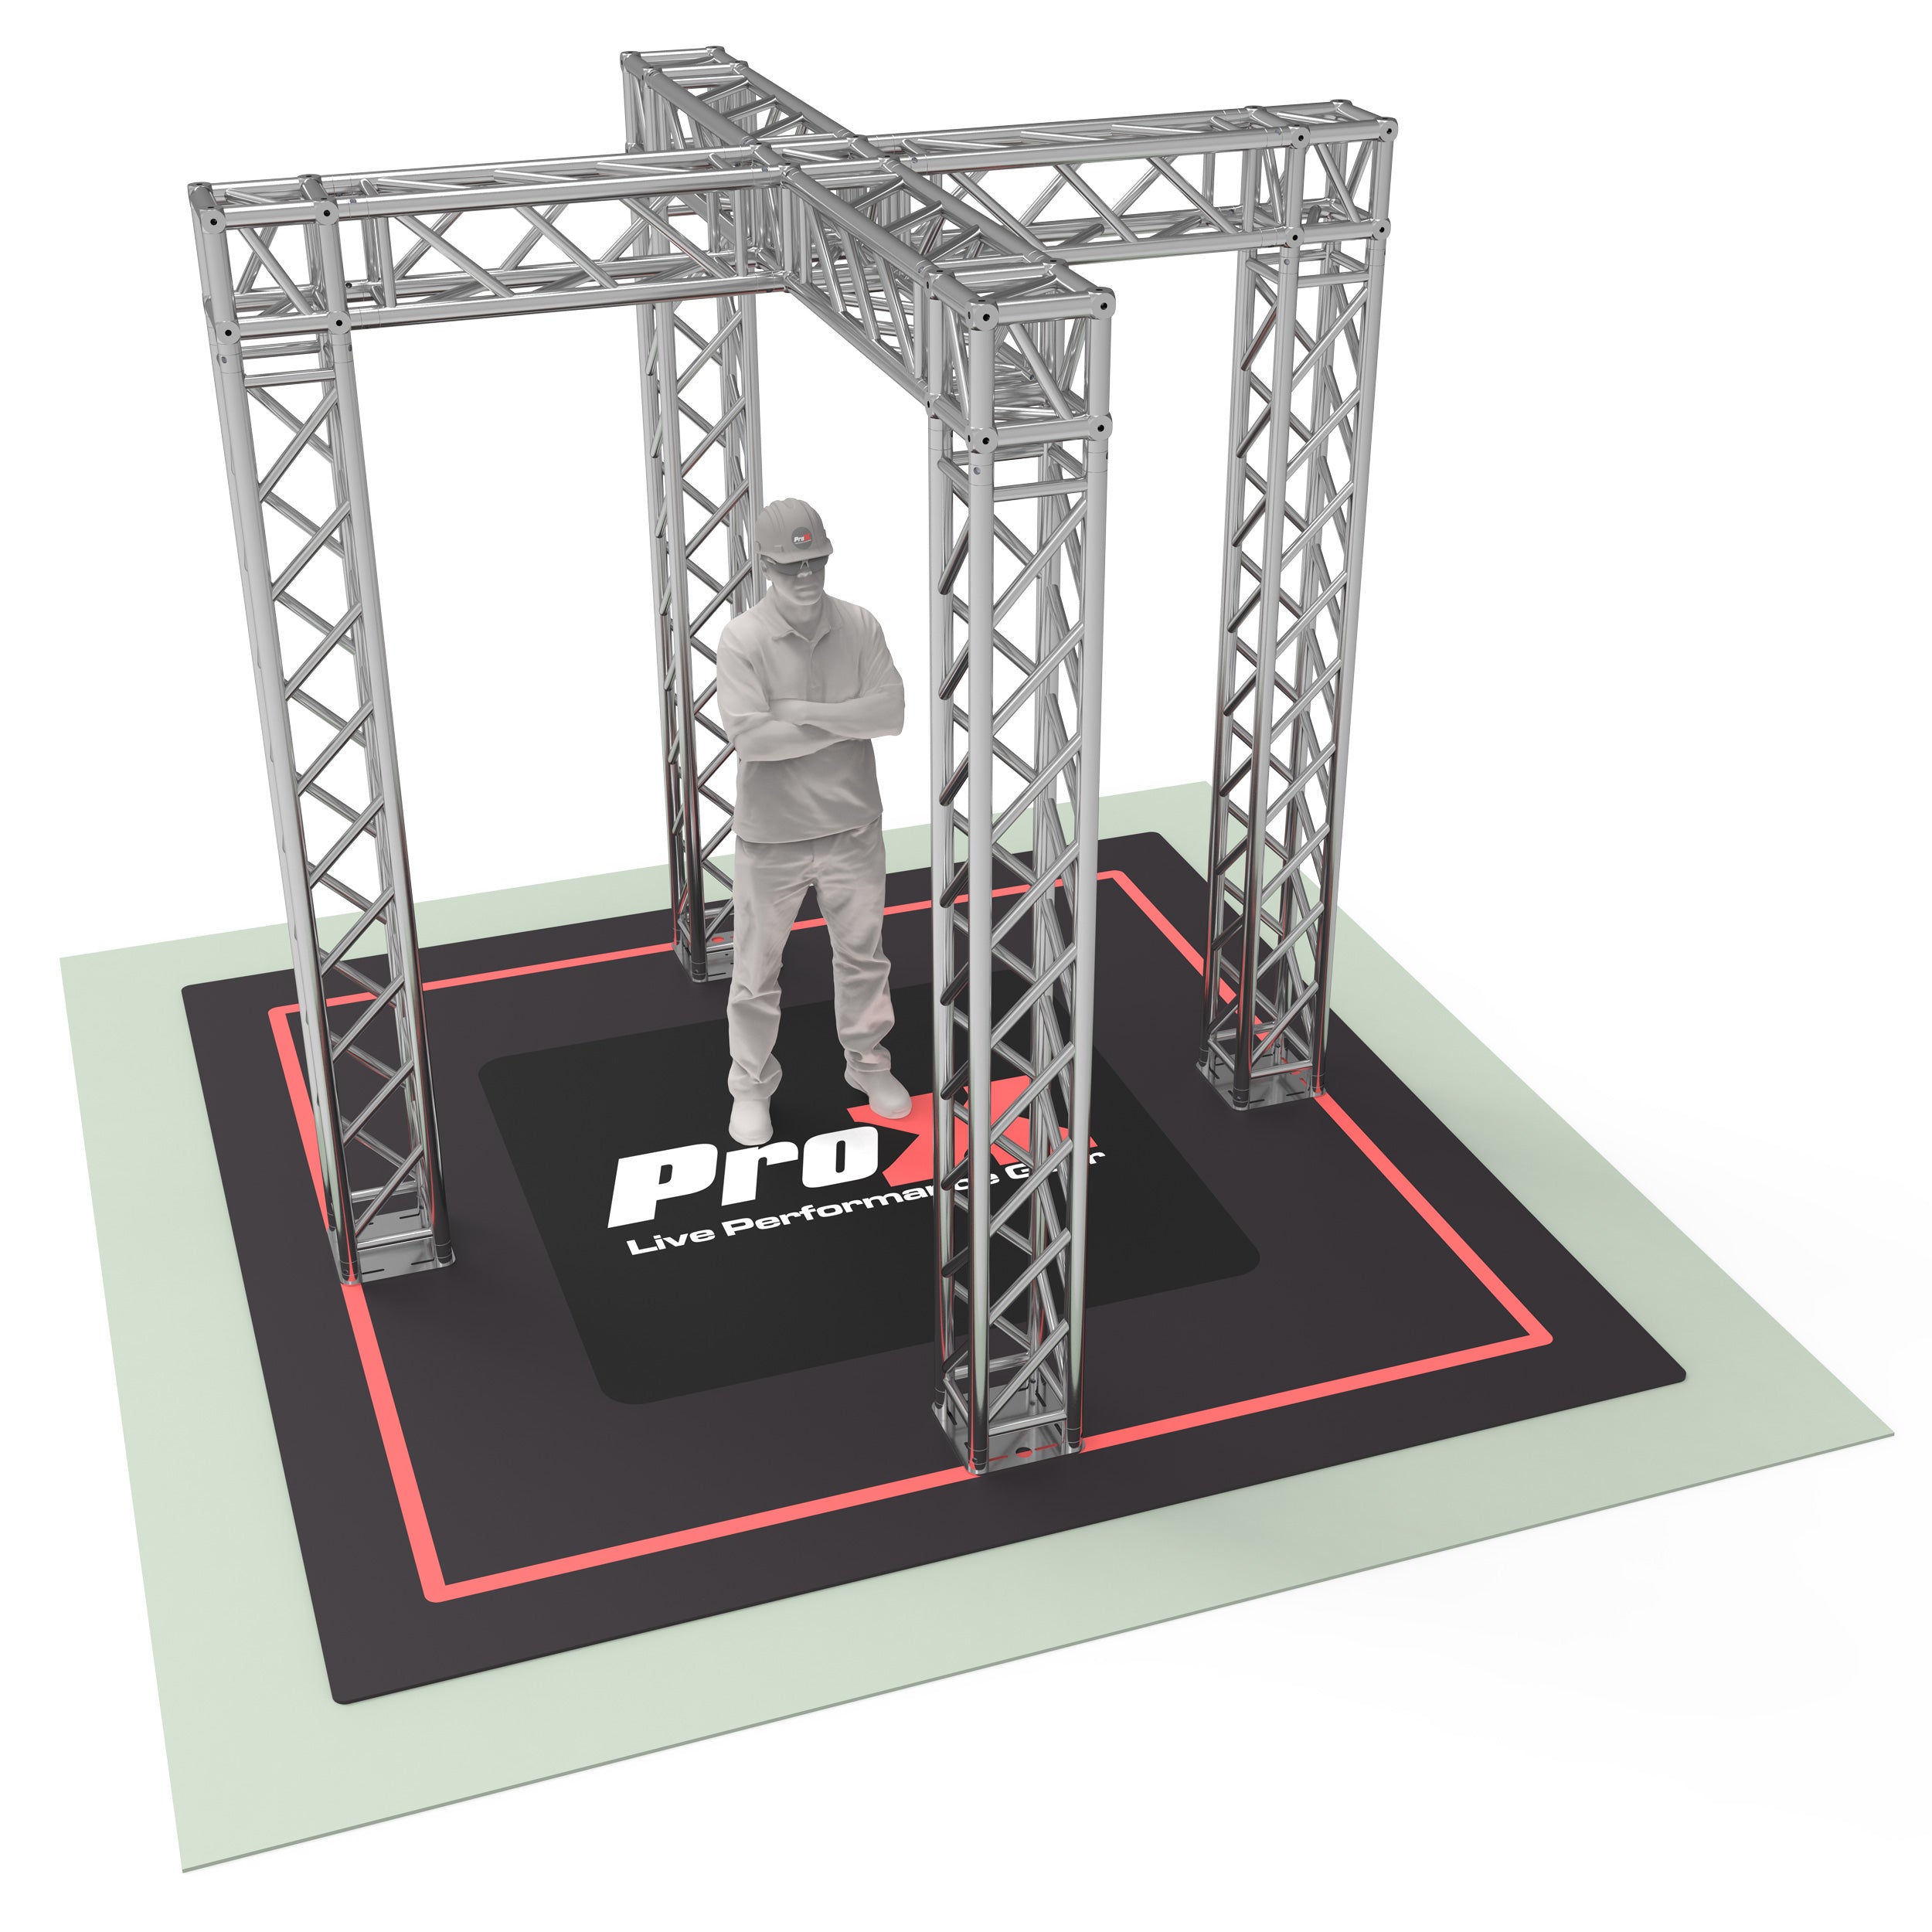 Pro X Tradeshow Booth 9.42 W X 9.42 L X 9.20 FT H with X Shape Design in center - K SERIES Light Duty KTP-999X